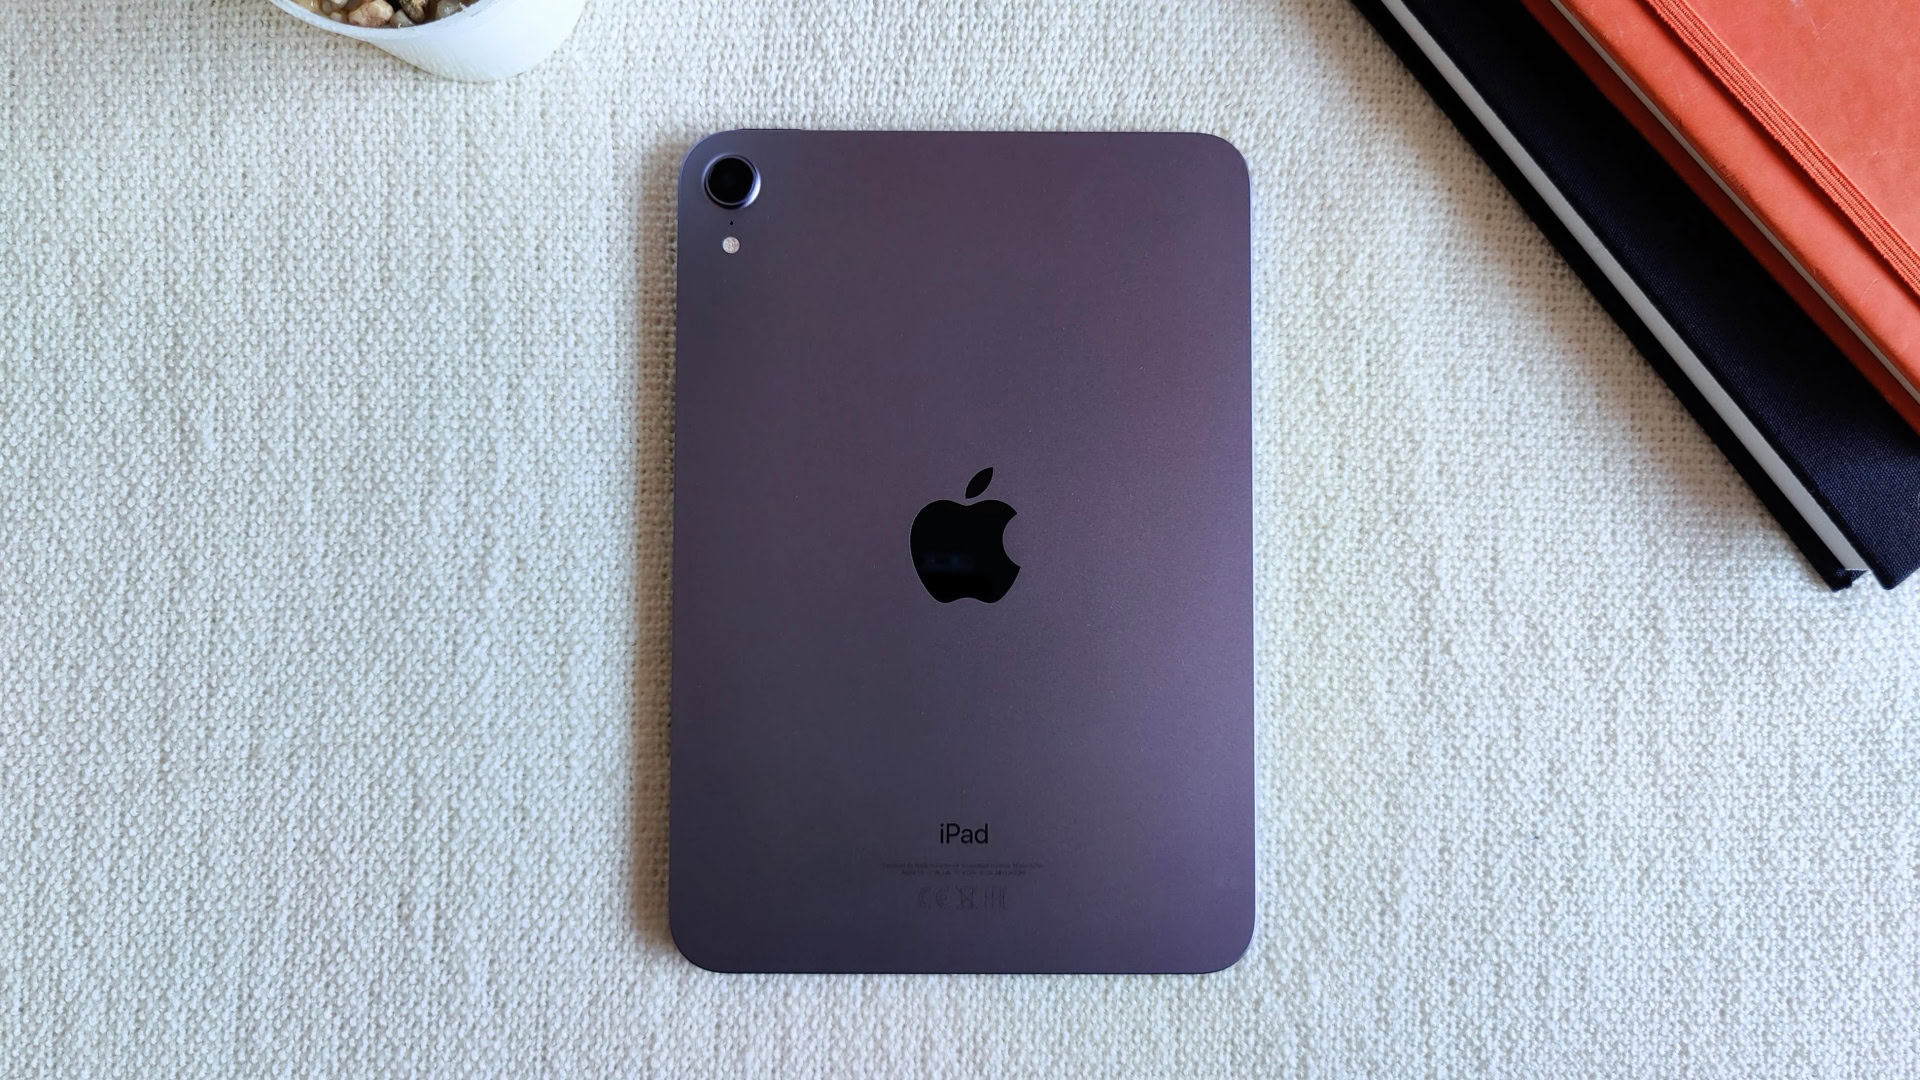 iPad Mini (7th gen) rumors: Expected release date, what we want to see